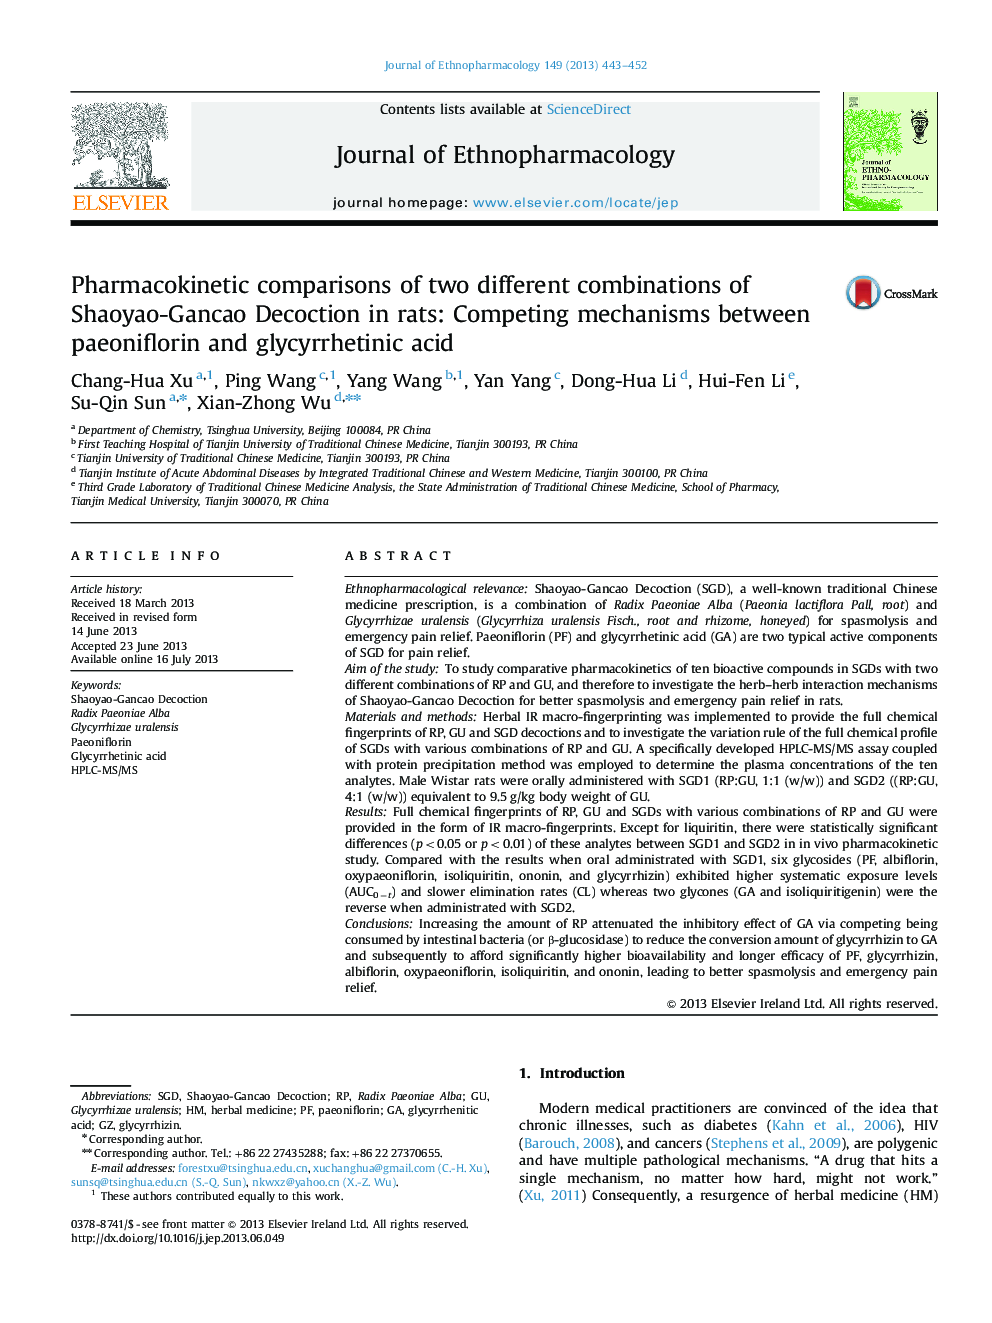 Pharmacokinetic comparisons of two different combinations of Shaoyao-Gancao Decoction in rats: Competing mechanisms between paeoniflorin and glycyrrhetinic acid